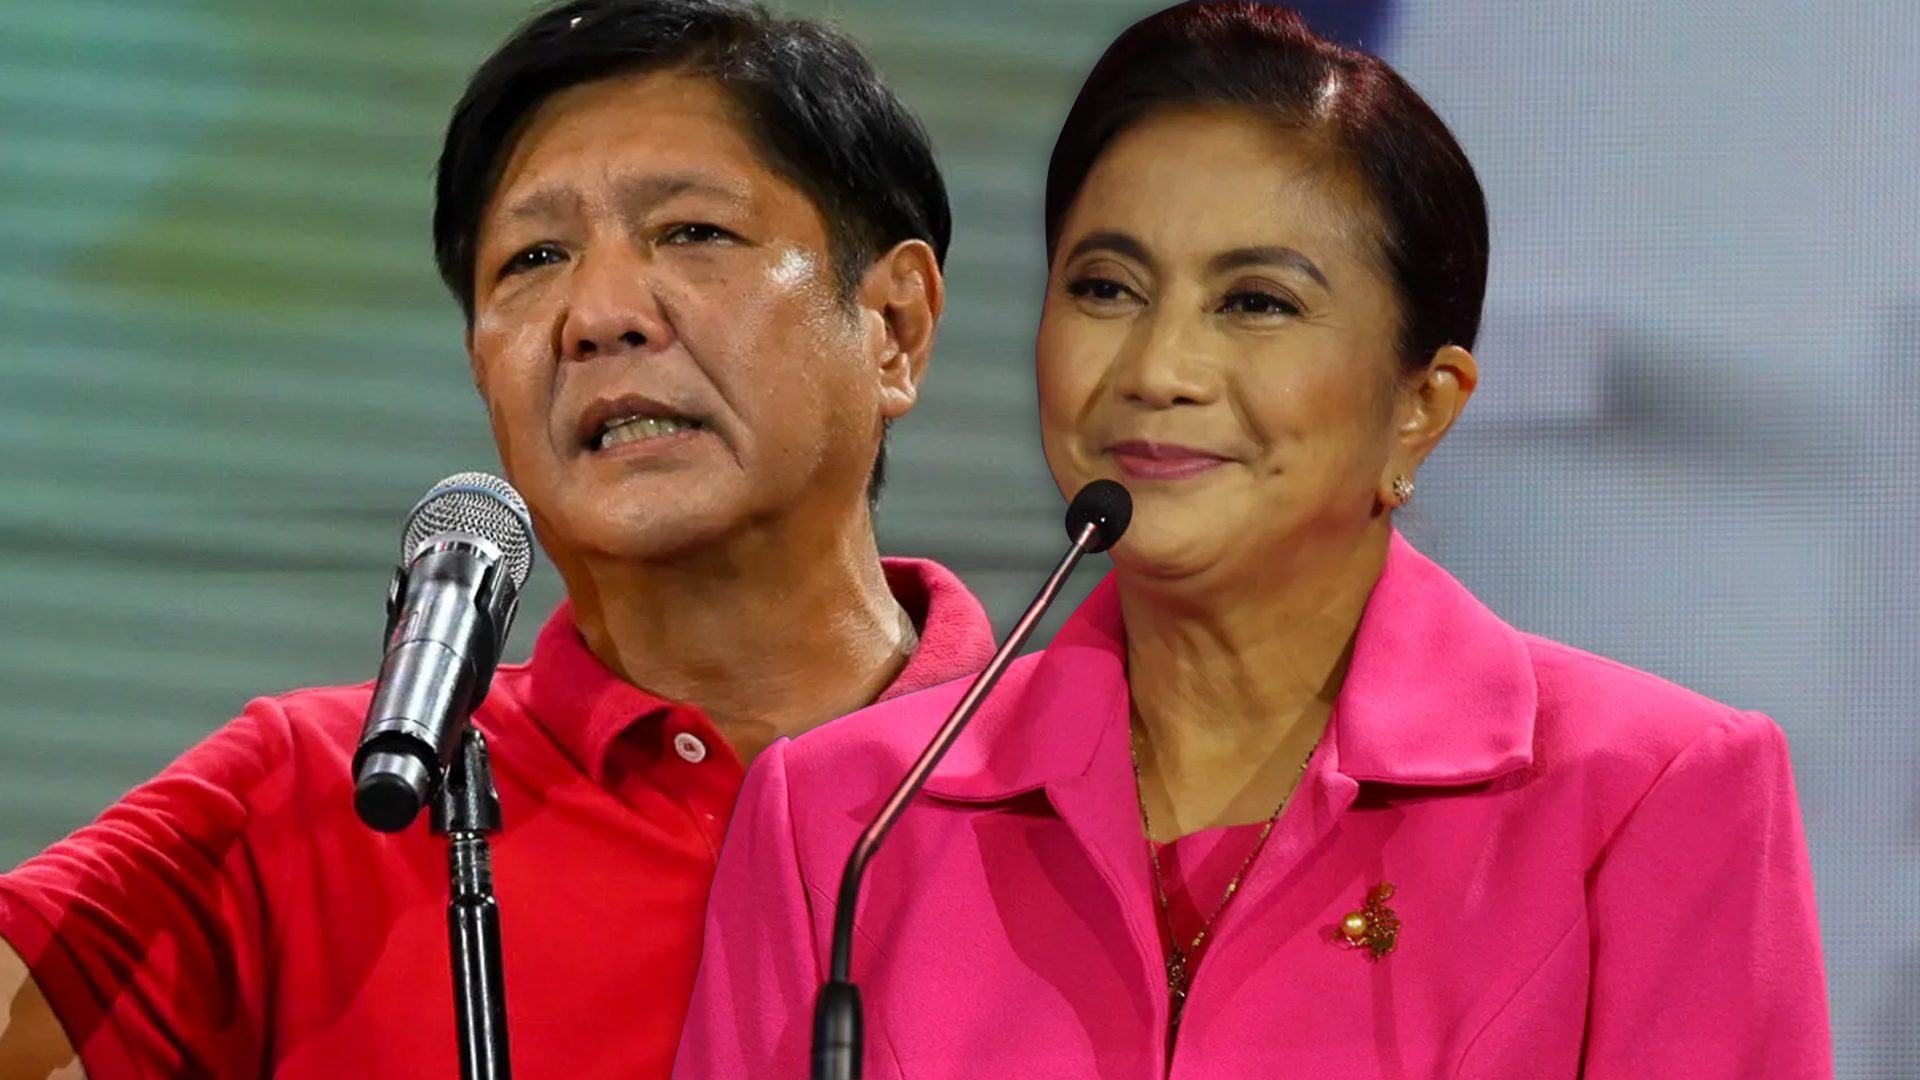 EXPLAINER: What’s at stake in the Philippine election?